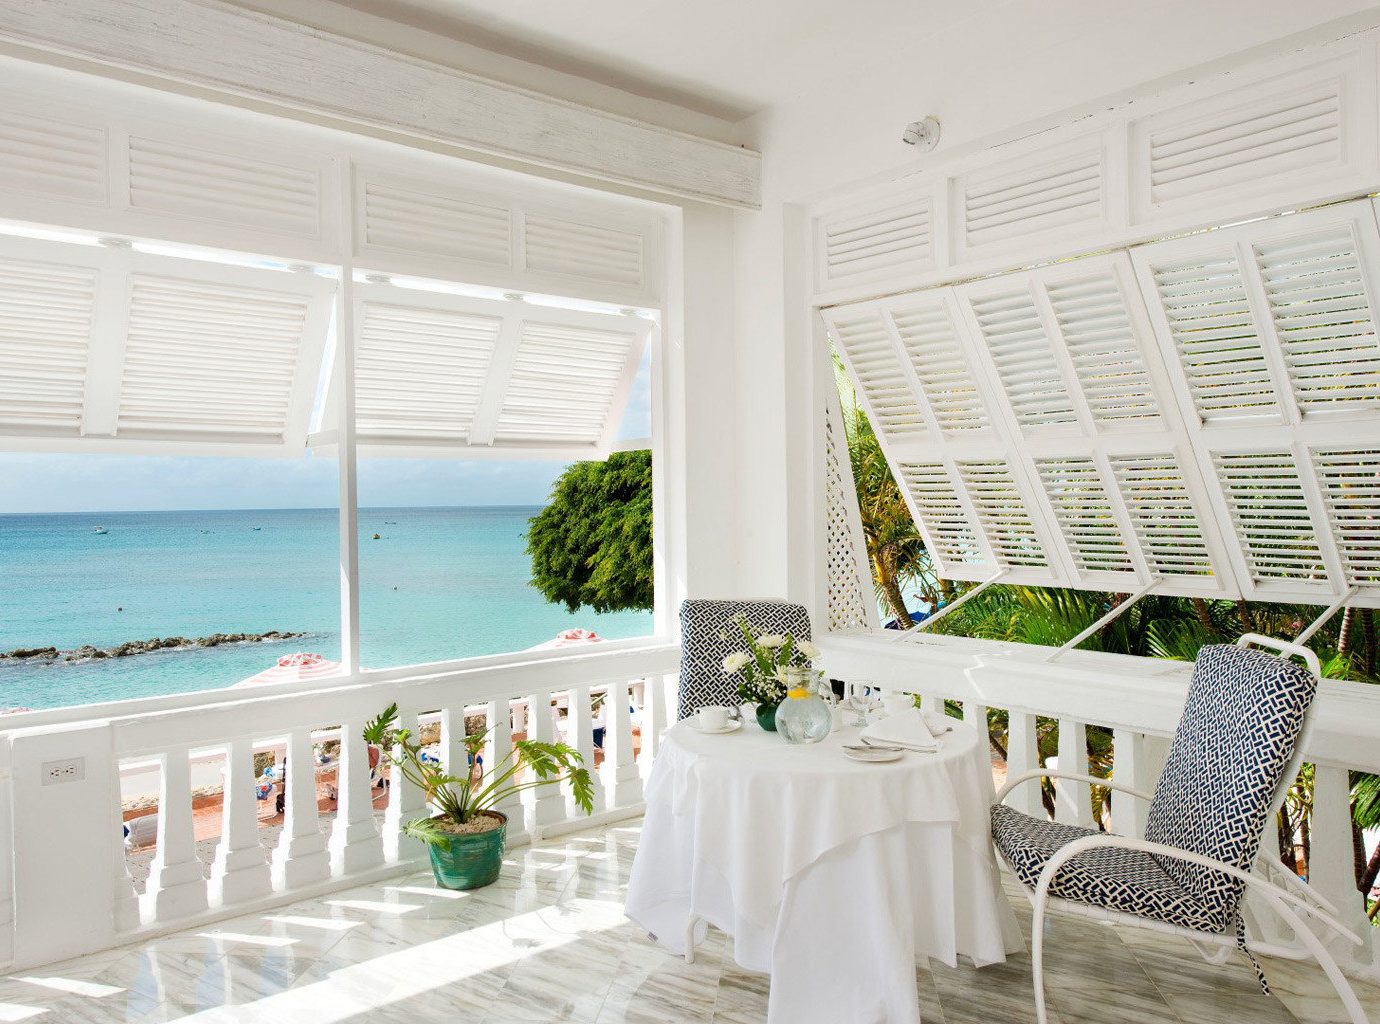 Balcony Beach Beachfront Country Elegant Island Lounge Nature Outdoors Scenic views Terrace Trip Ideas Waterfront window indoor room property interior design white estate home window covering real estate porch furniture